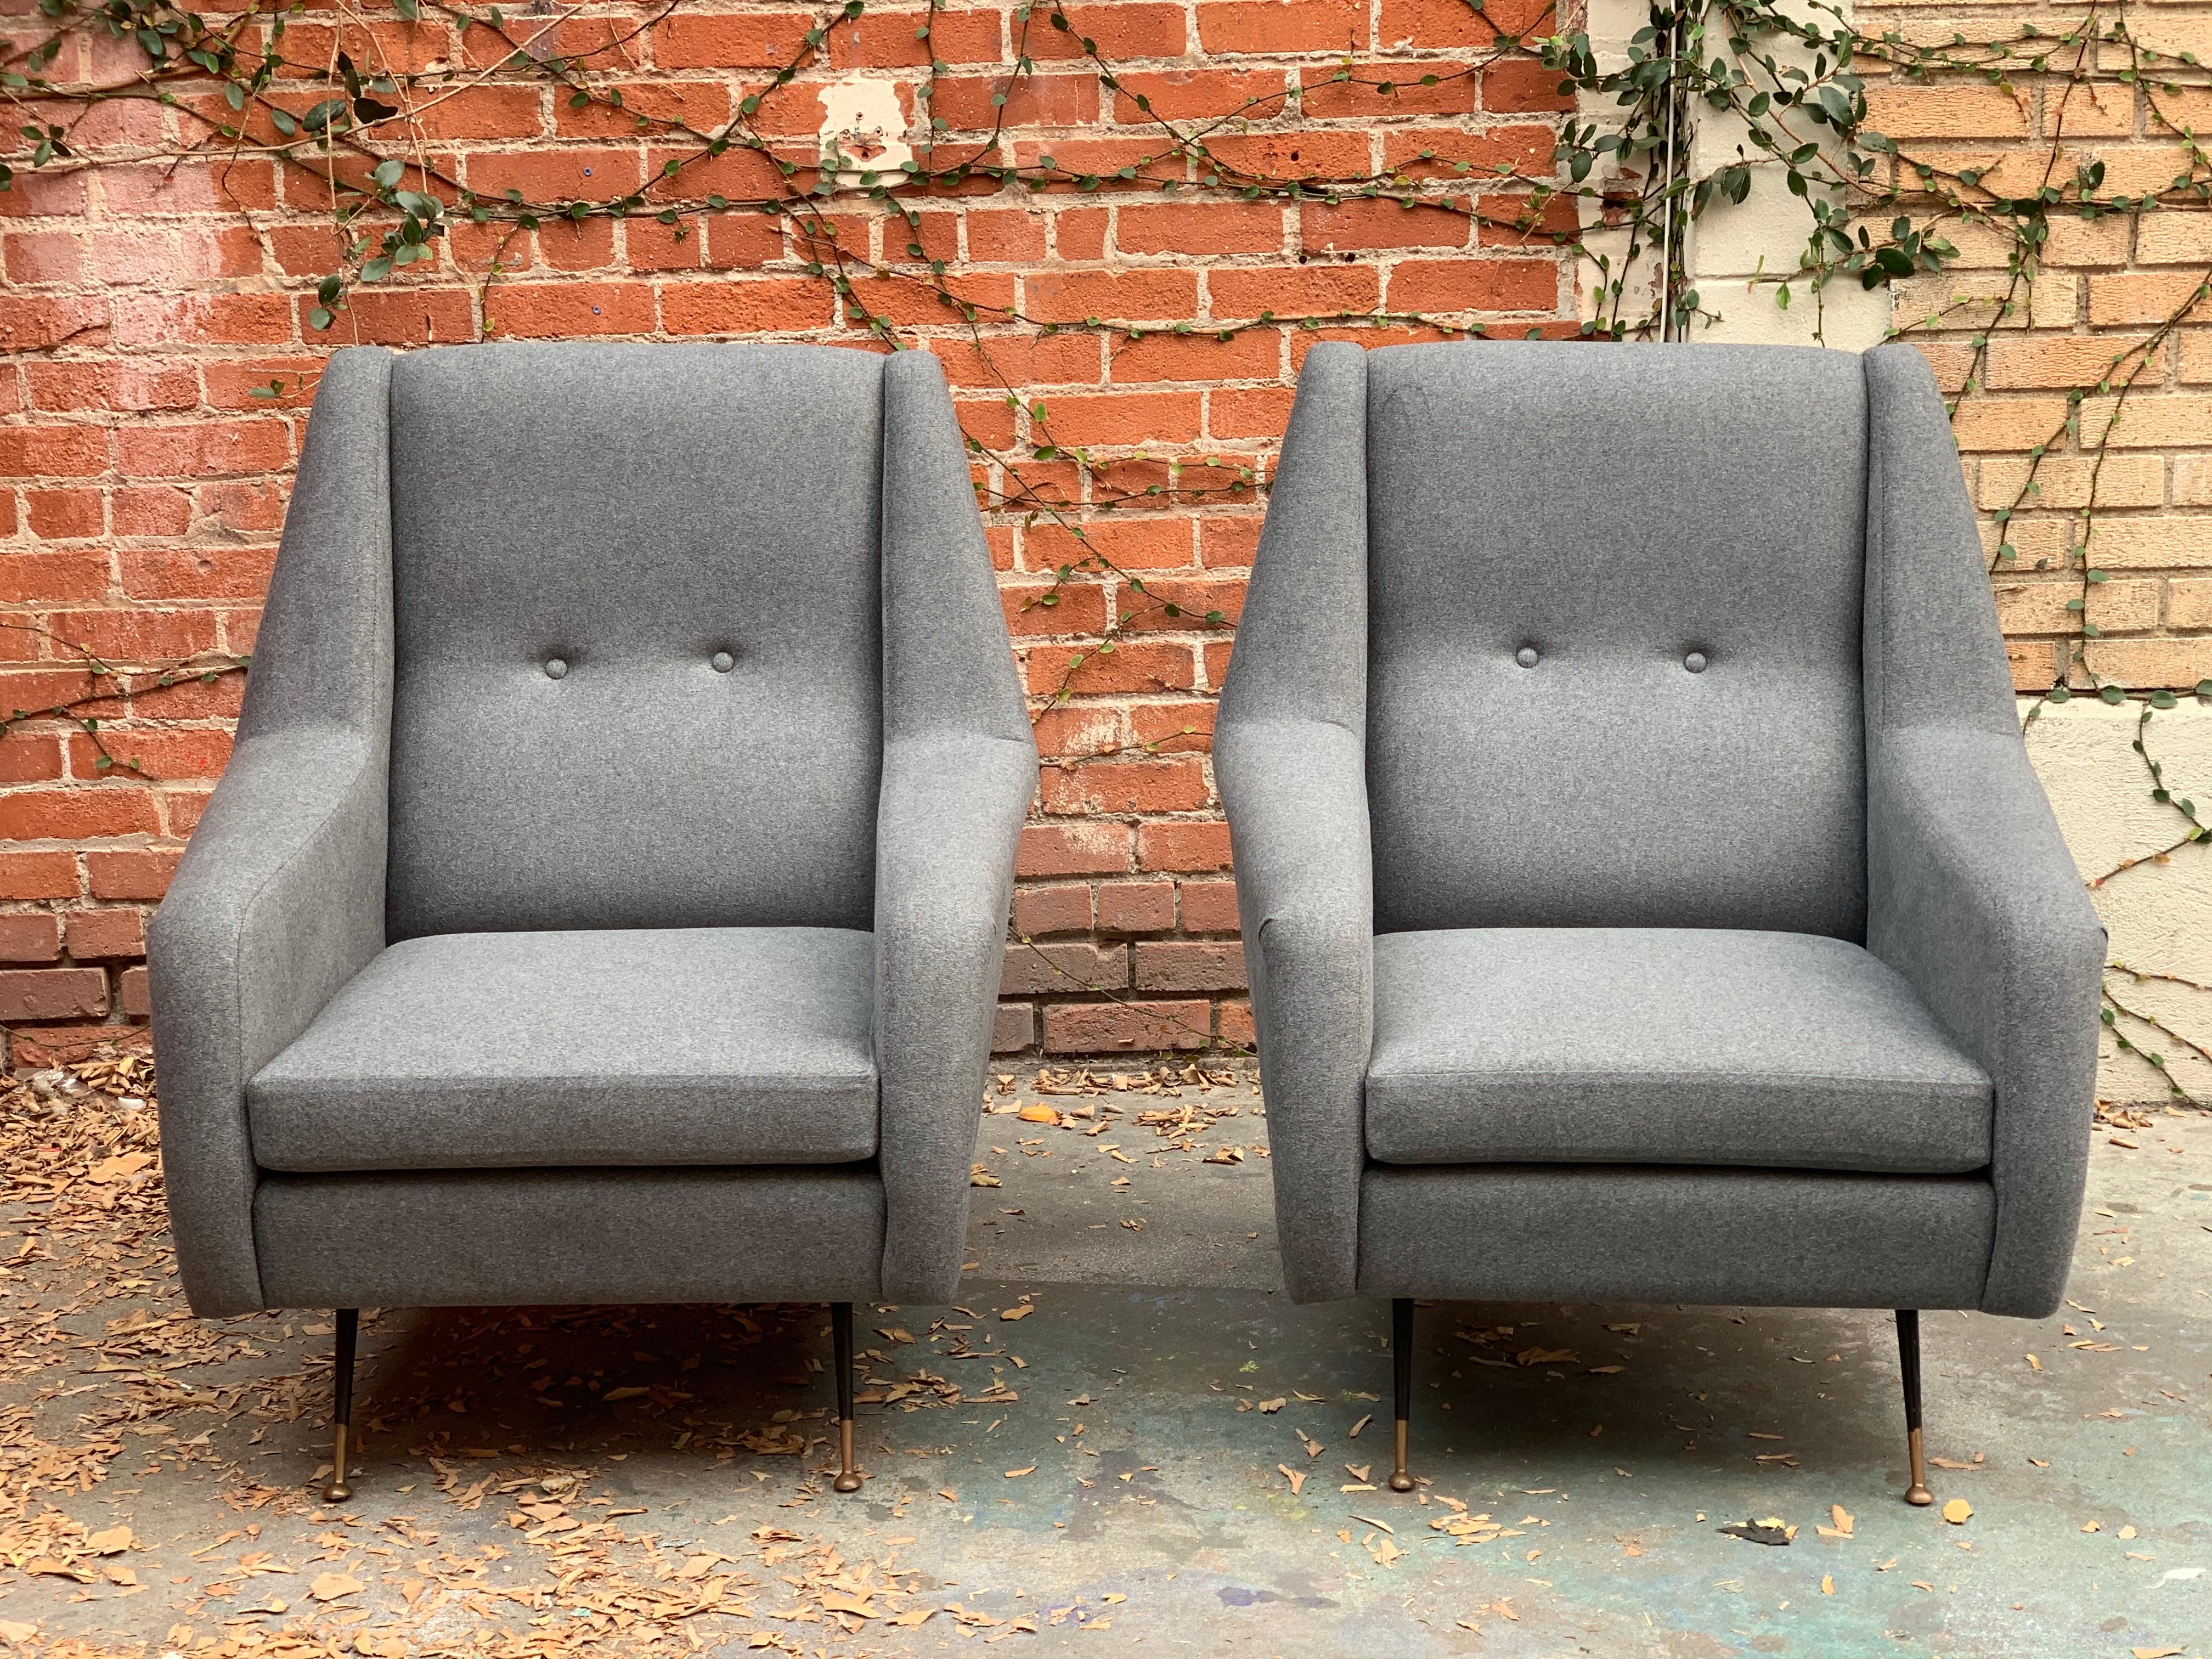 20th Century Pair of Italian Midcentury Tufted Chairs by Ico Parisi in Grey Flannel